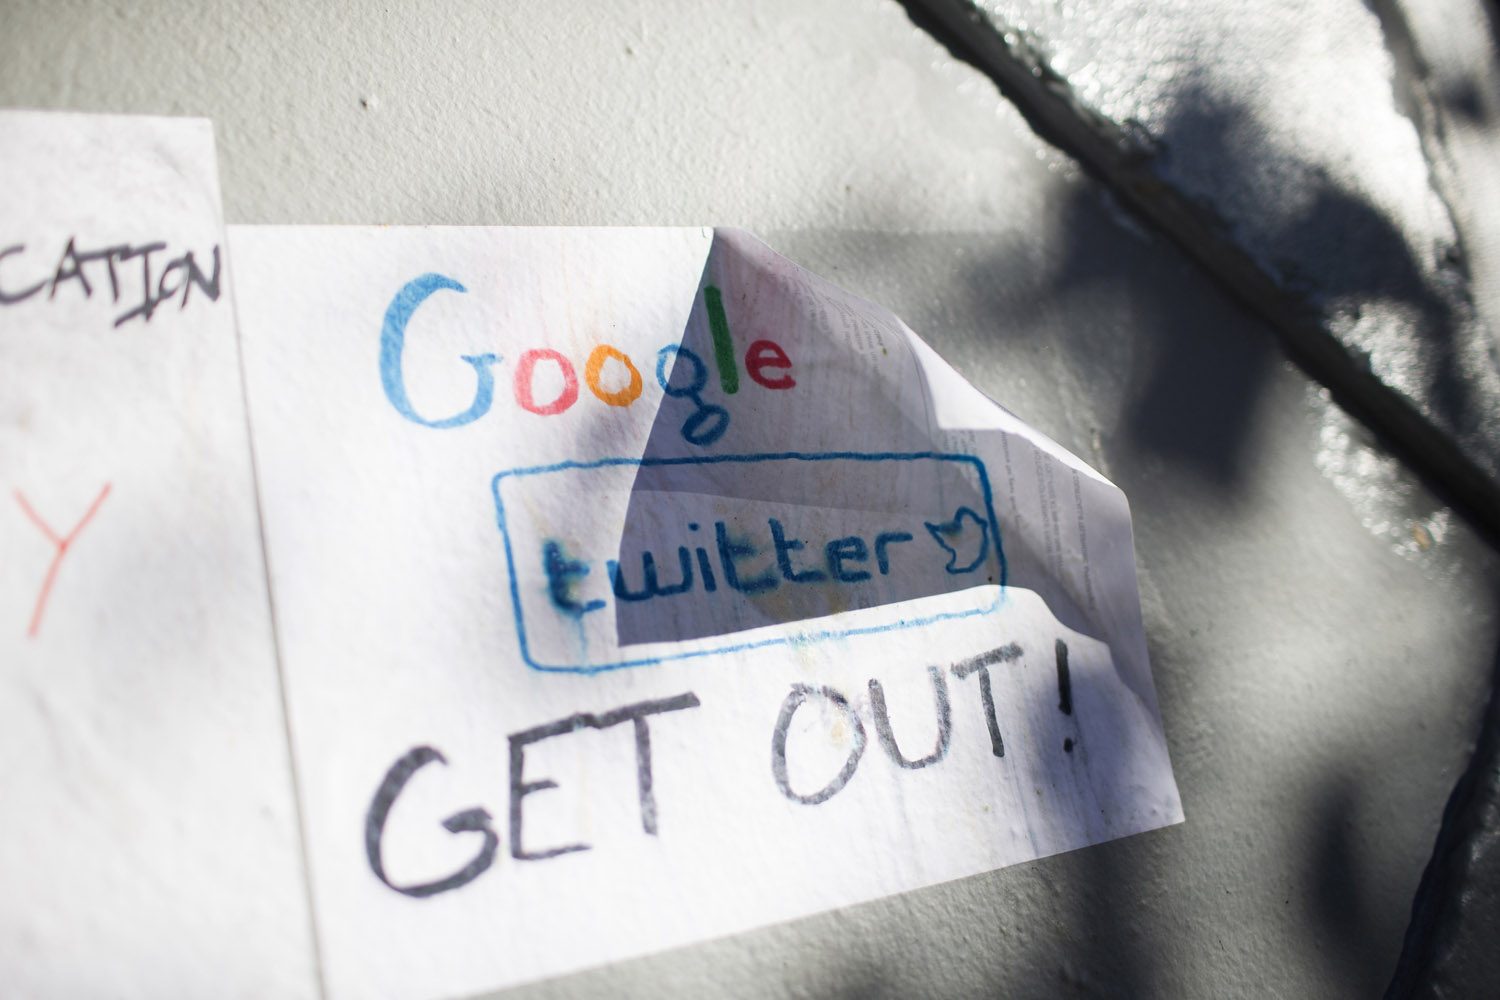 Signs in opposition of technology companies are seen in San Francisco, California Dec. 9, 2013.